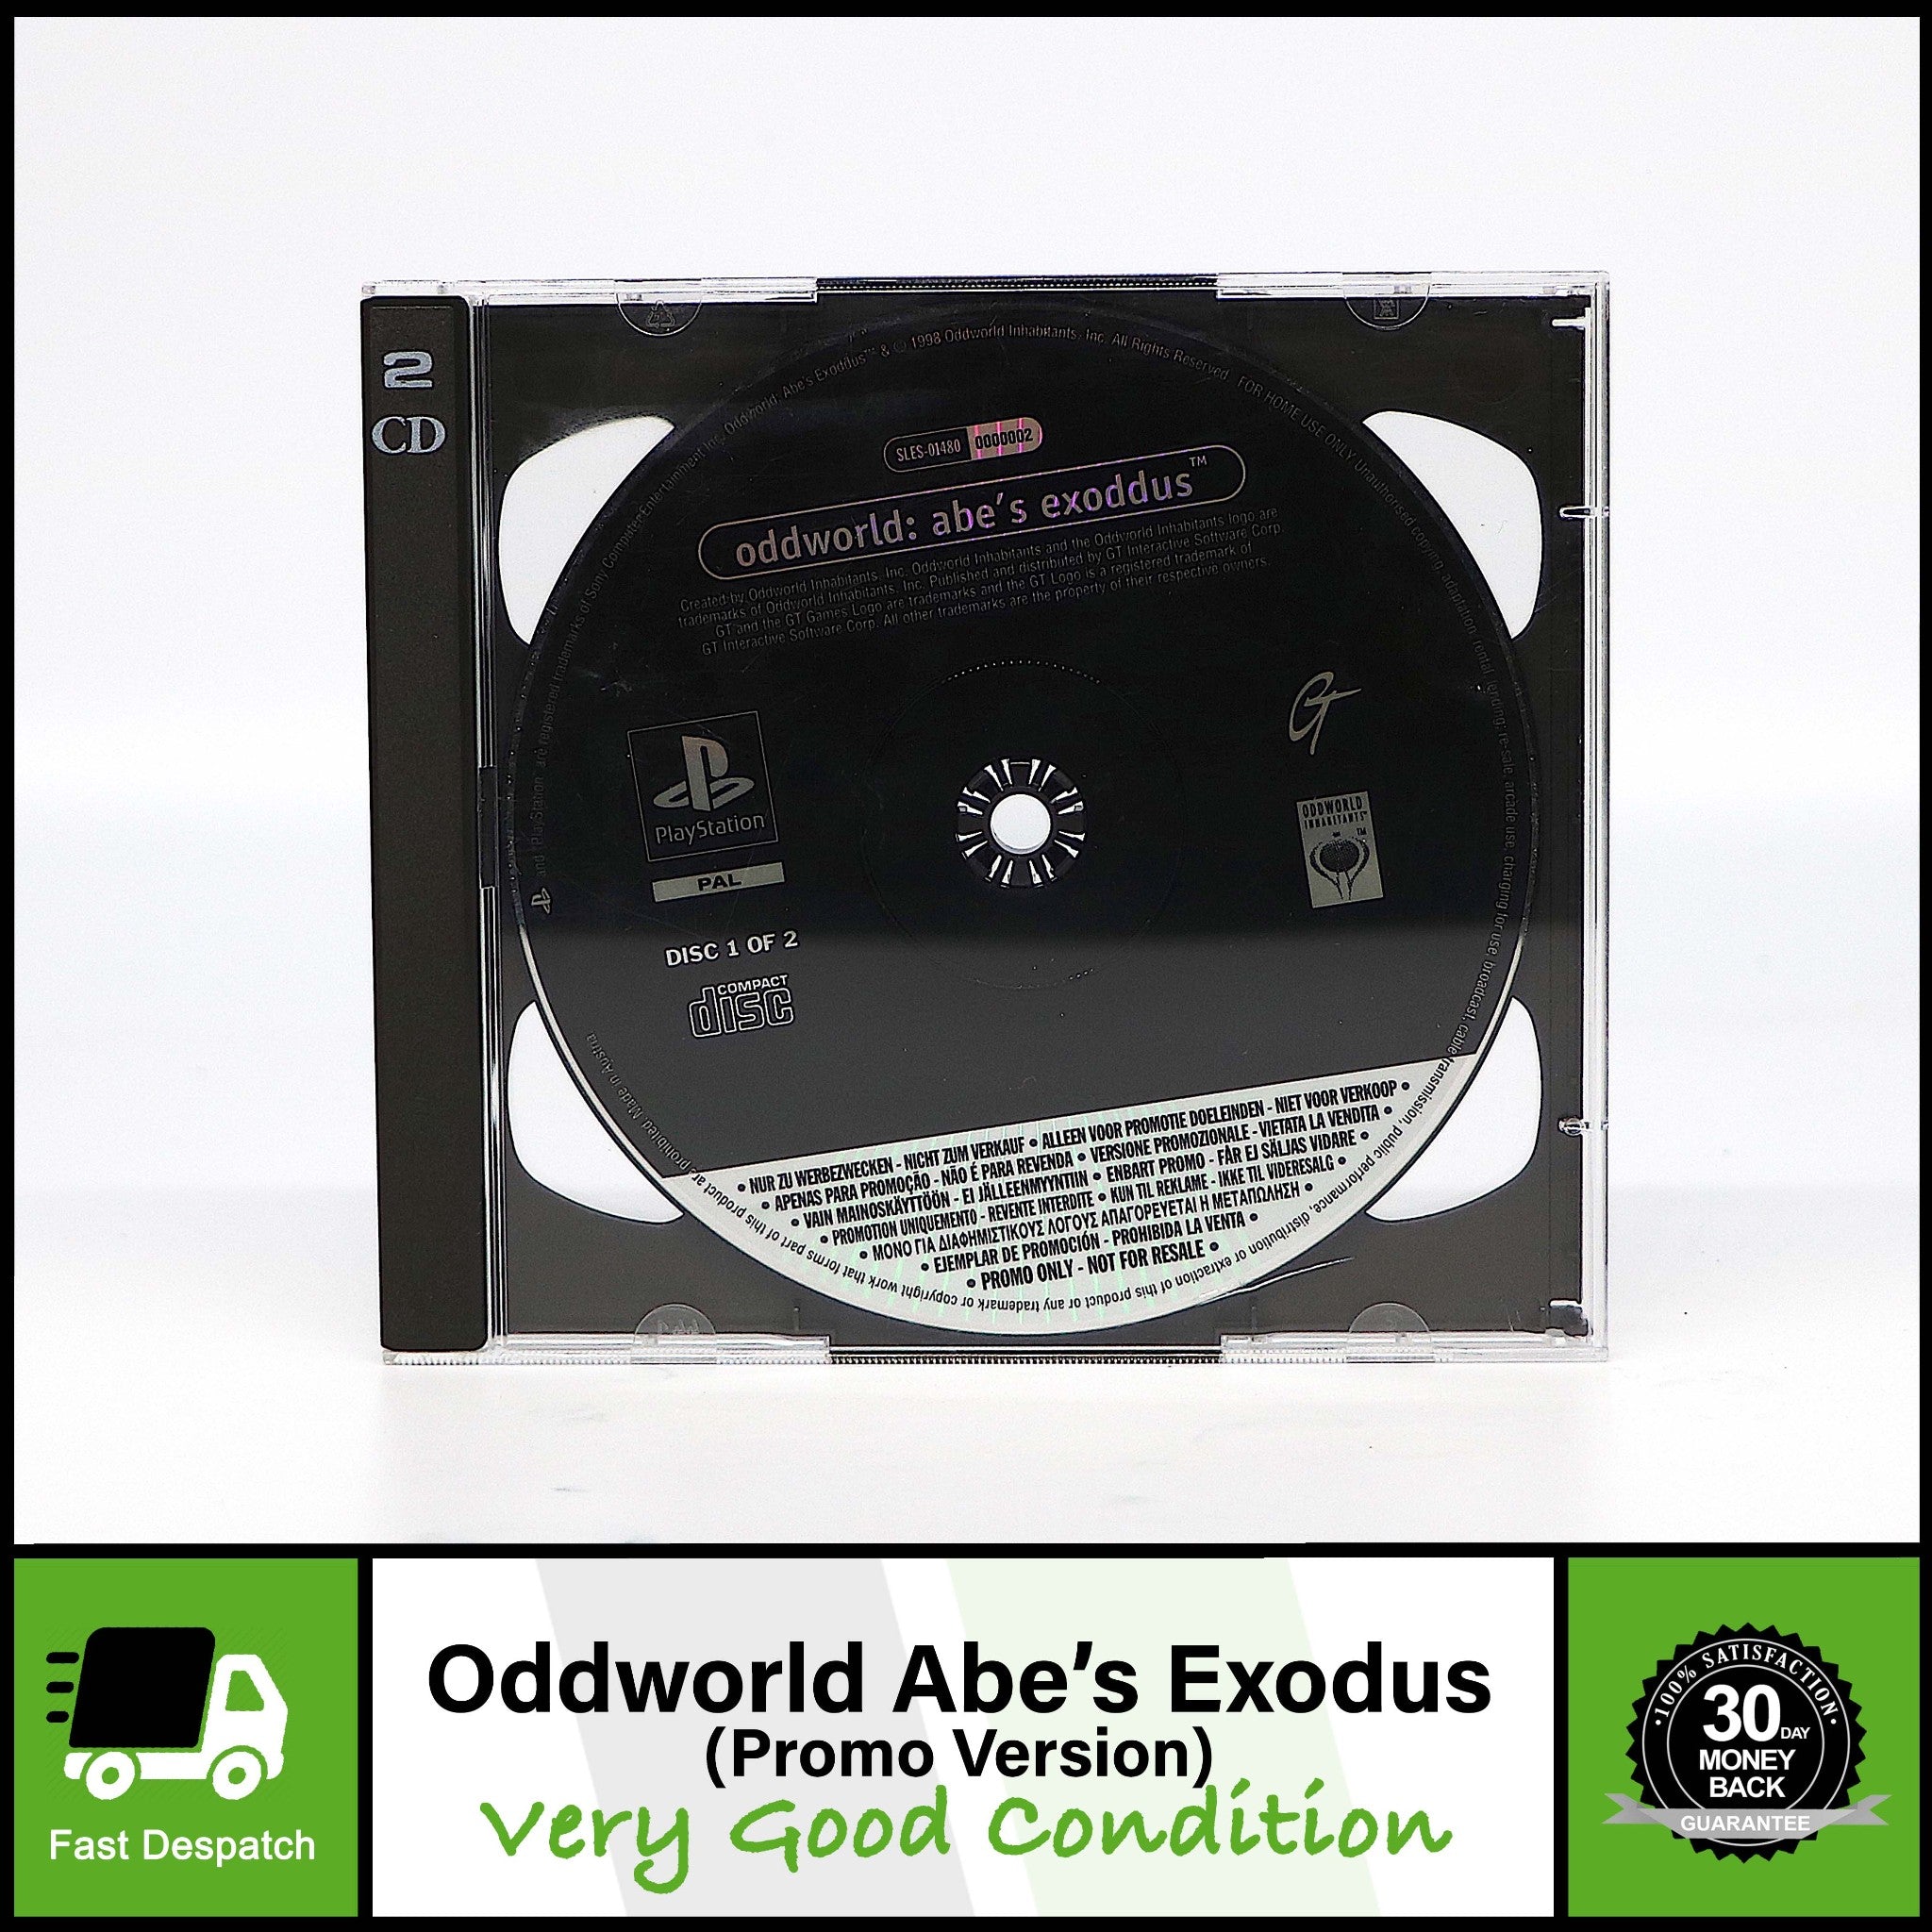 Oddworld Abe's Exoddus | Sony PS1 Game | Promo Version | Collectable Condition